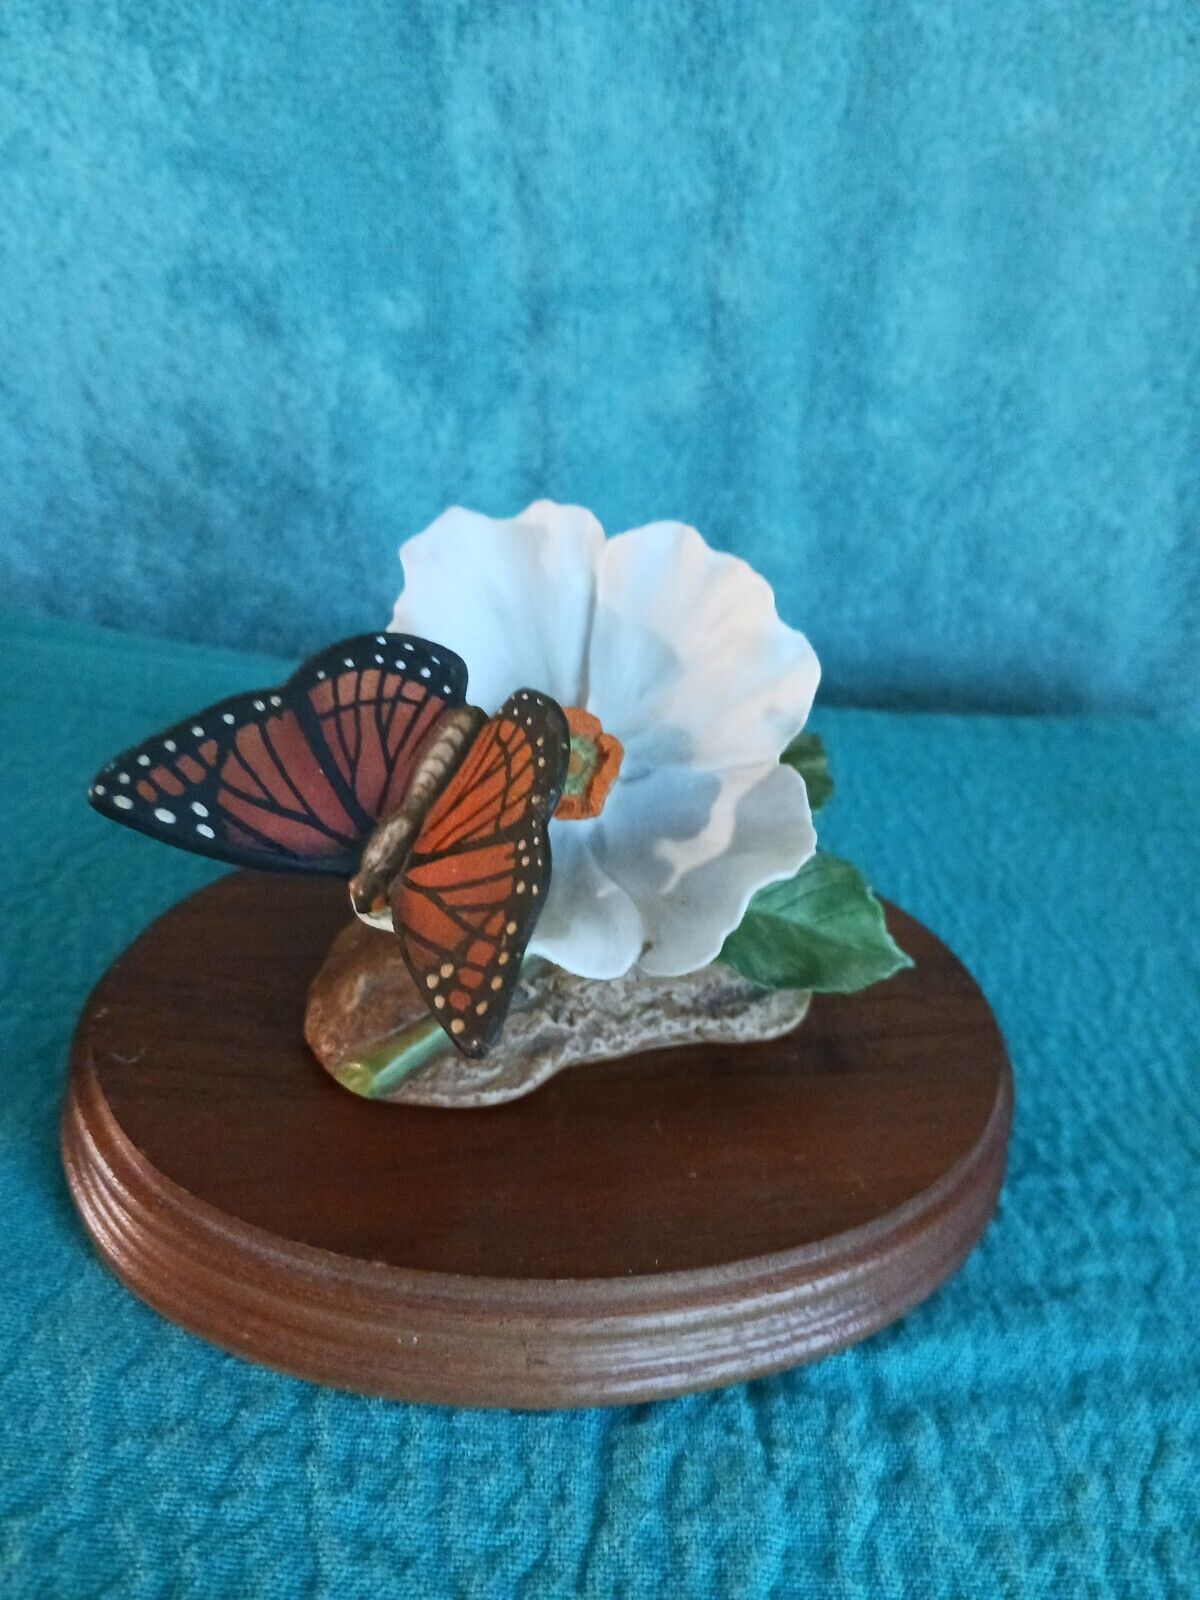 RARE Vintage Andrea by Sadek VICEROY BUTTERFLY 1986 with stand